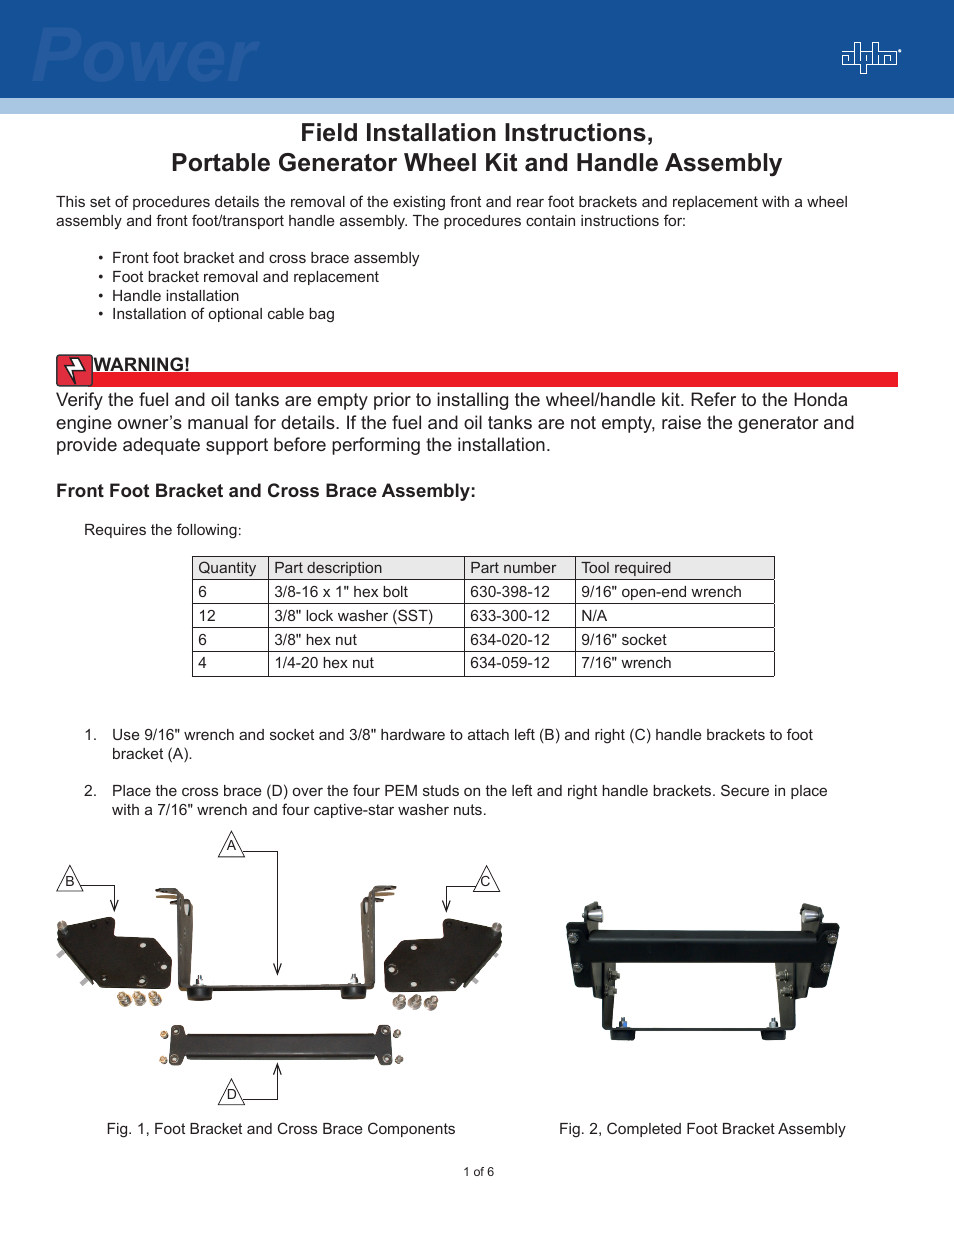 Portable Generator Wheel Kit and Handle Assembly